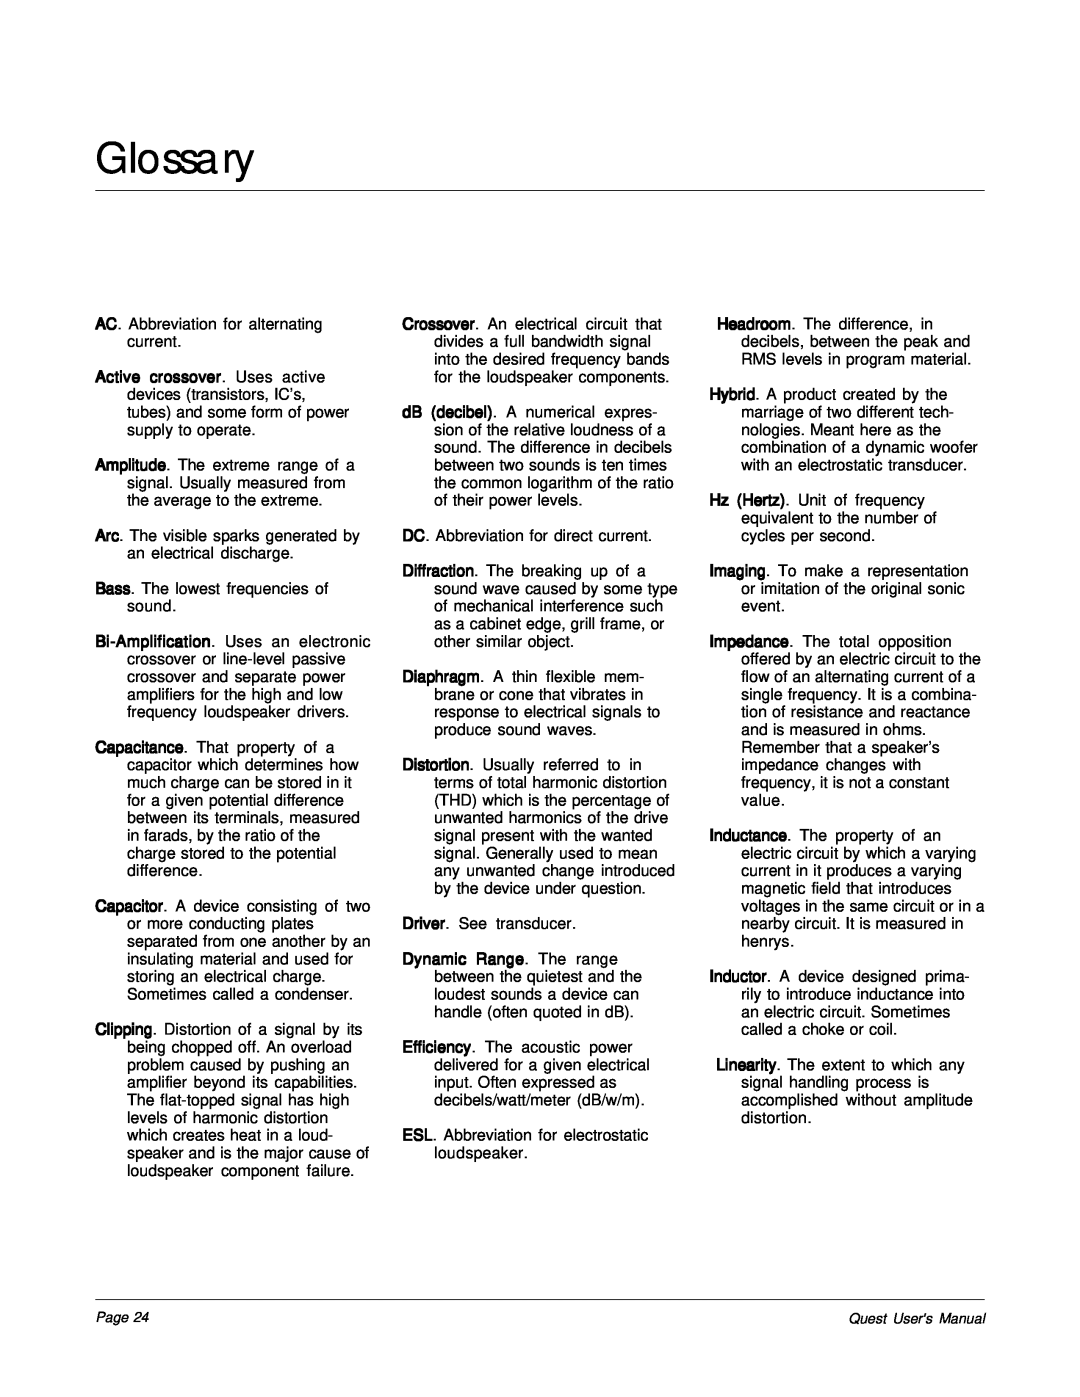 MartinLogan The Quest Speaker System user manual Glossary 